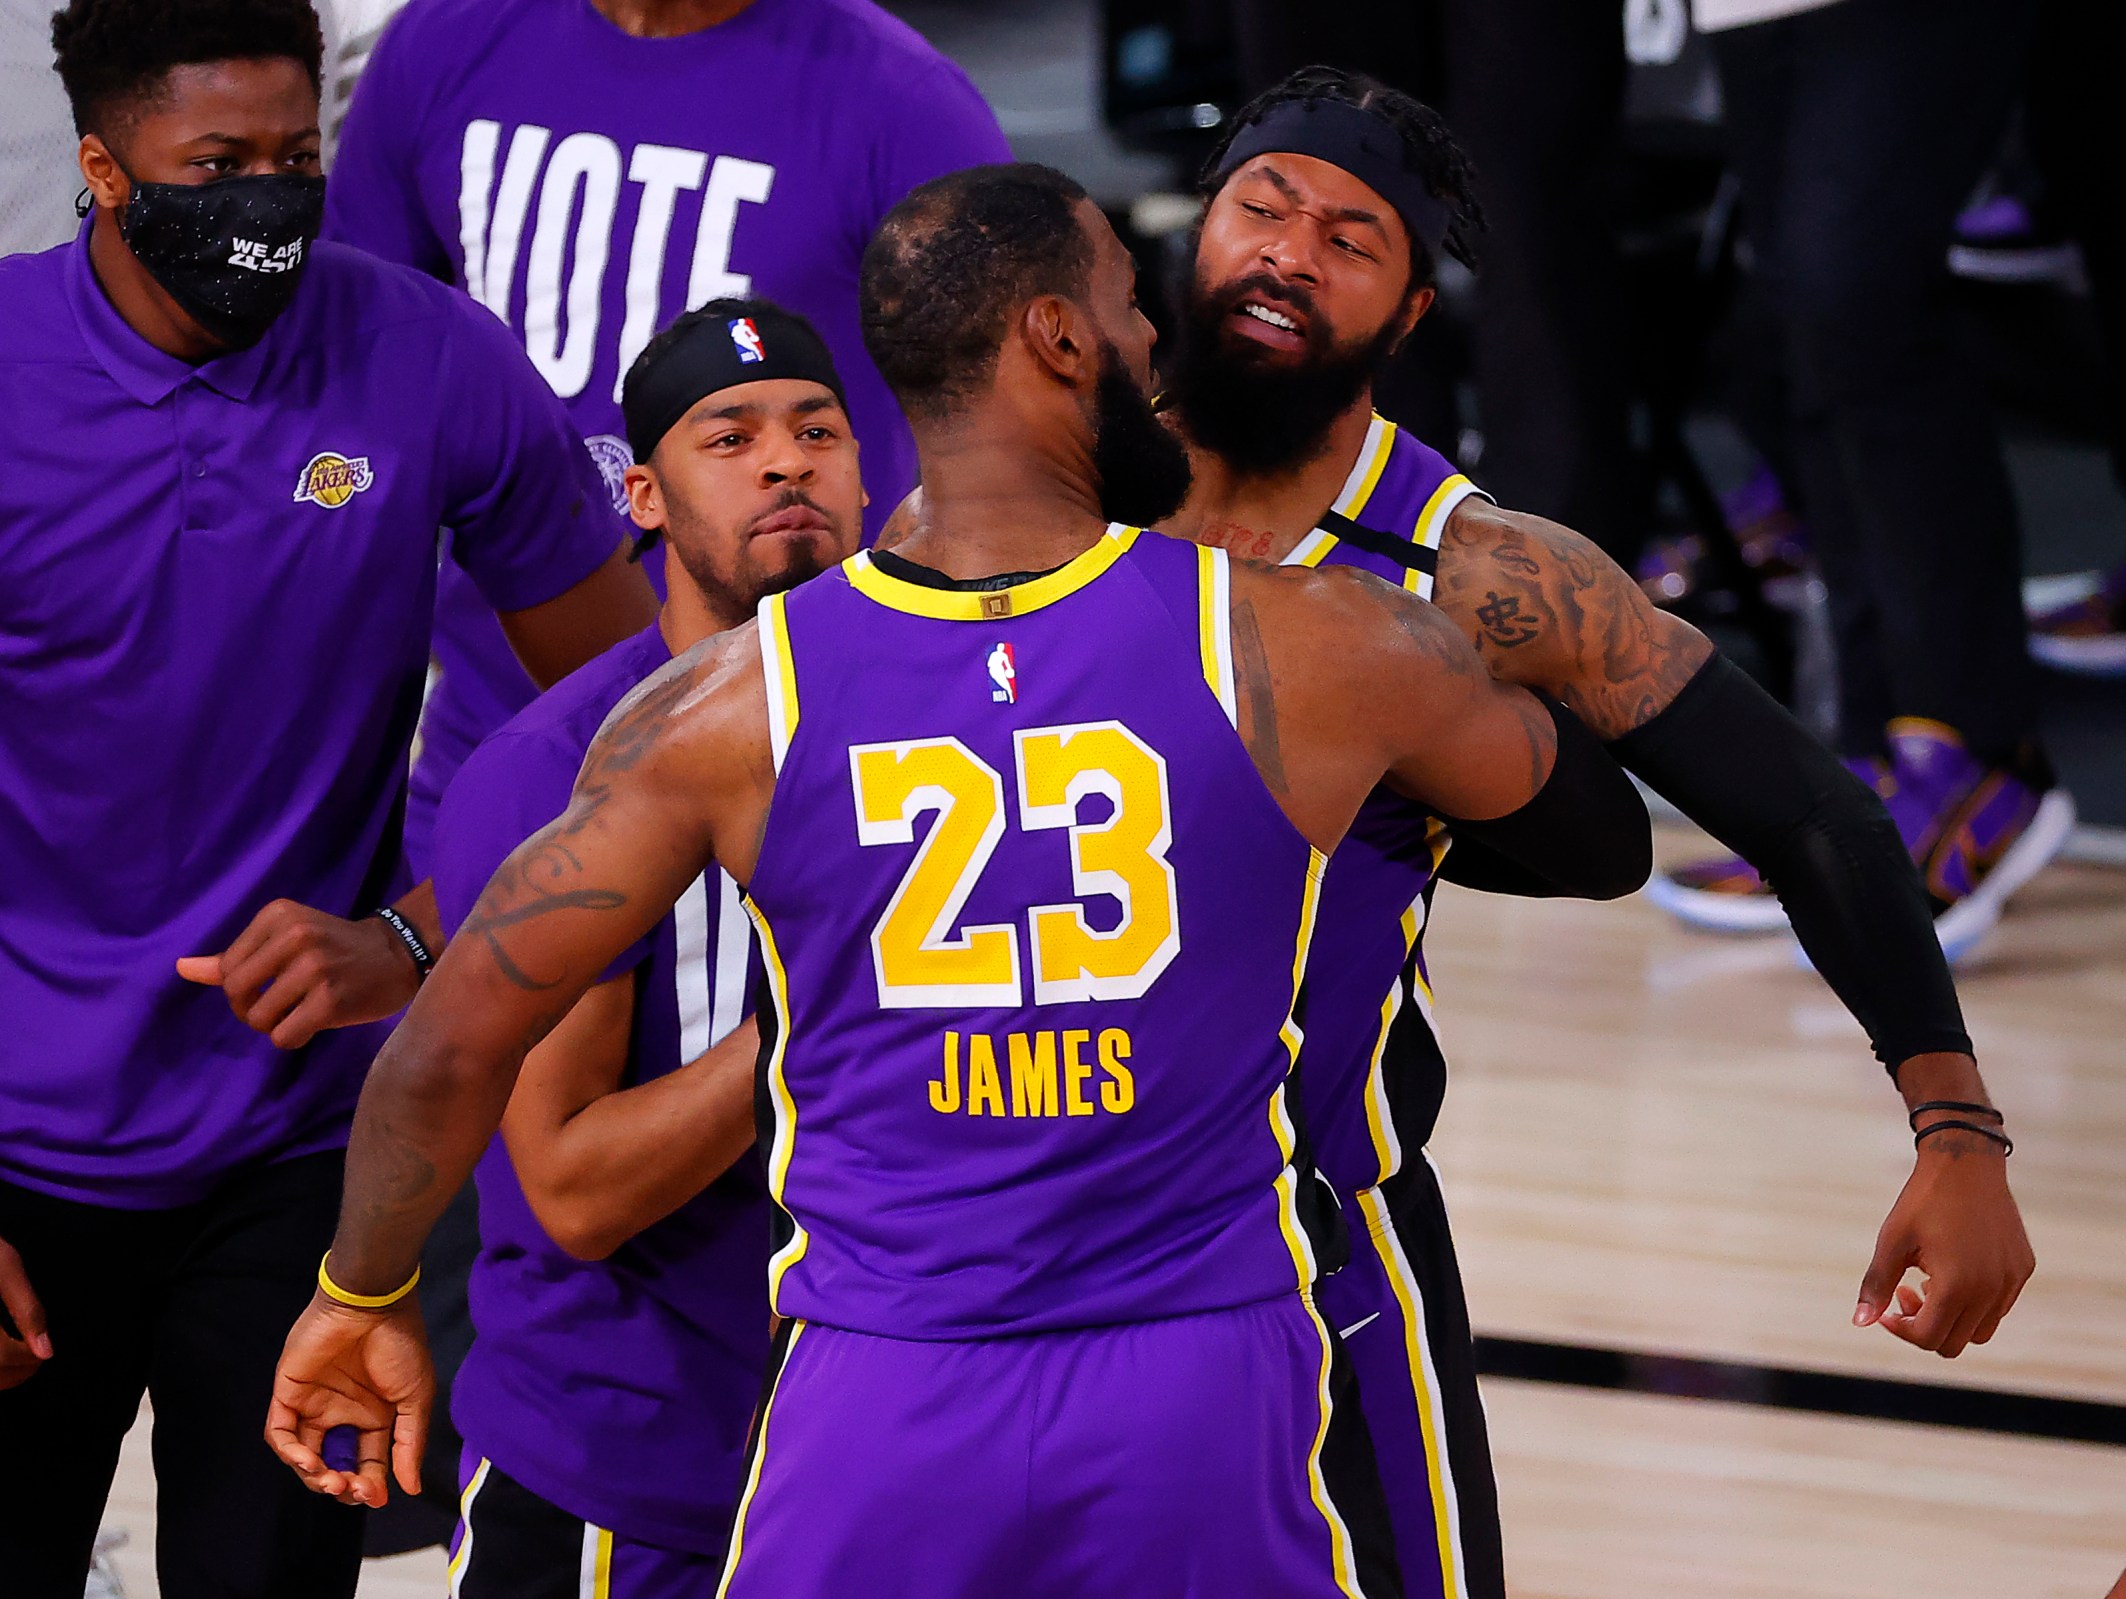 LeBron James and Markieff Morris of the Lakers chest-bump during a victorious Game 5 of the Western Conference Finals.